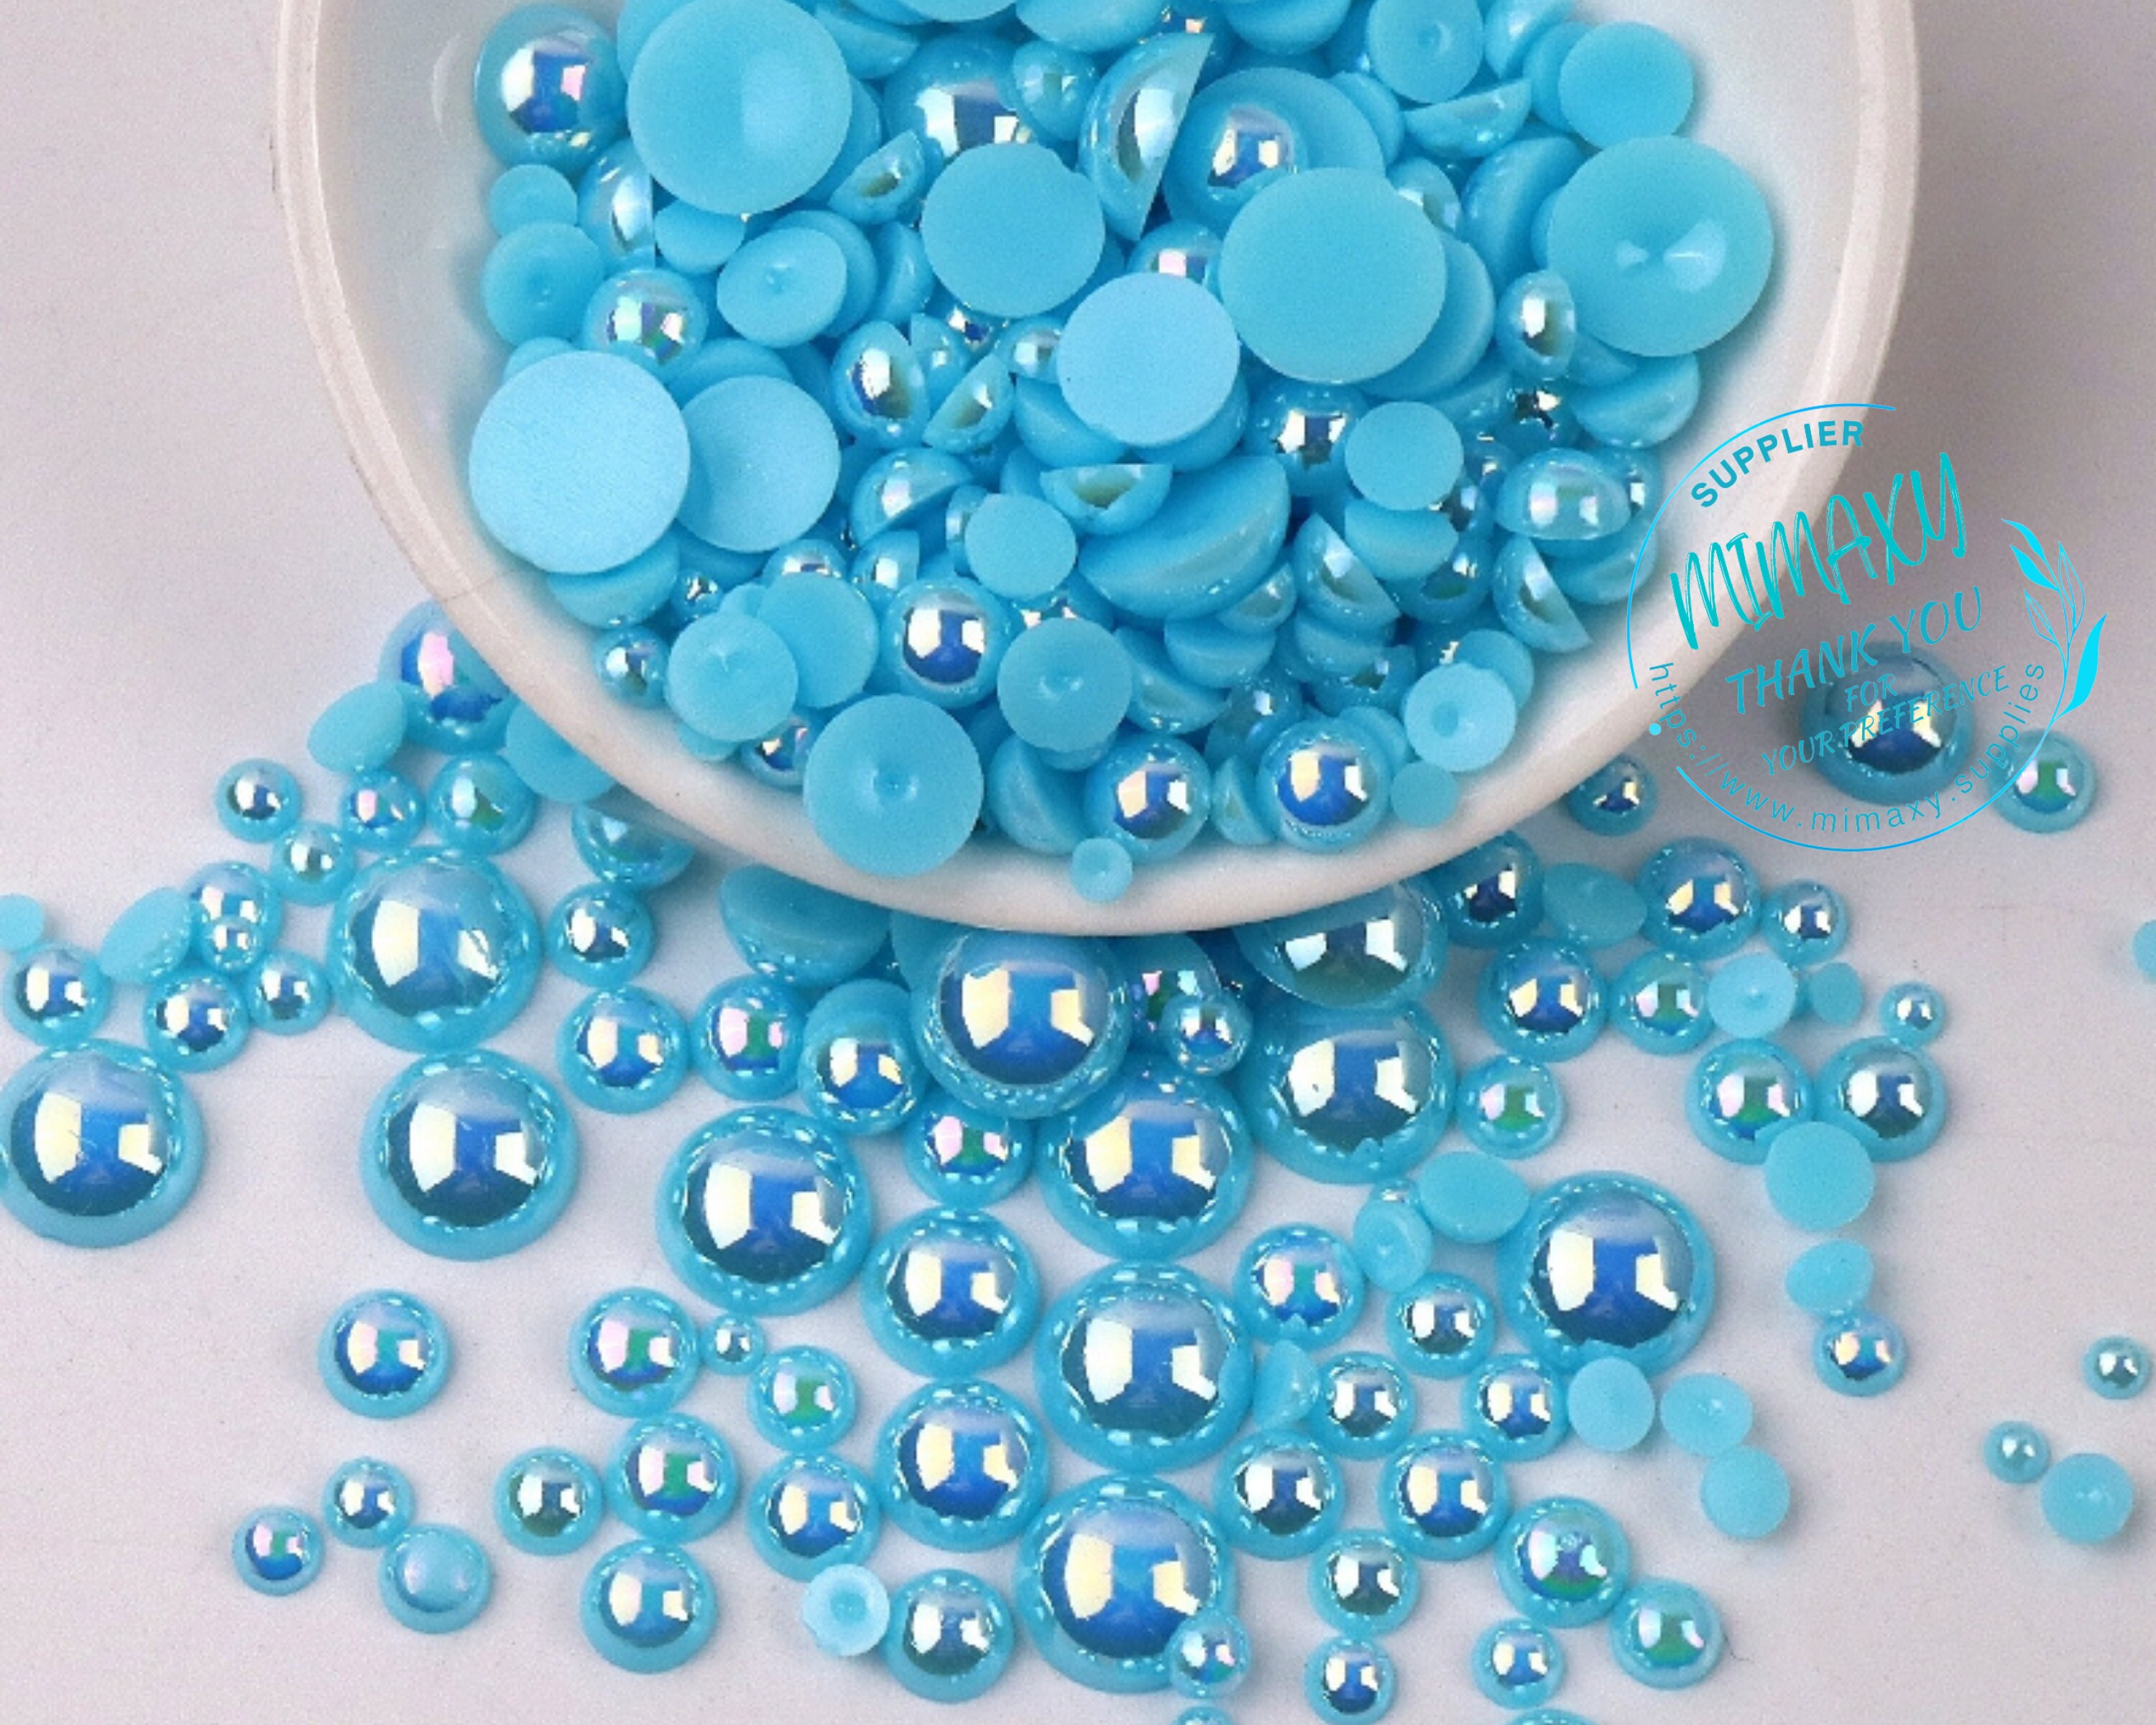 Waterfall Blue Pearl Mix, Flatback Pearls and Rhinestone Mix, Sizes Range  3MM-10MM, Flatback Jelly Resin, Faux Pearls Mix, Mixed Sizes